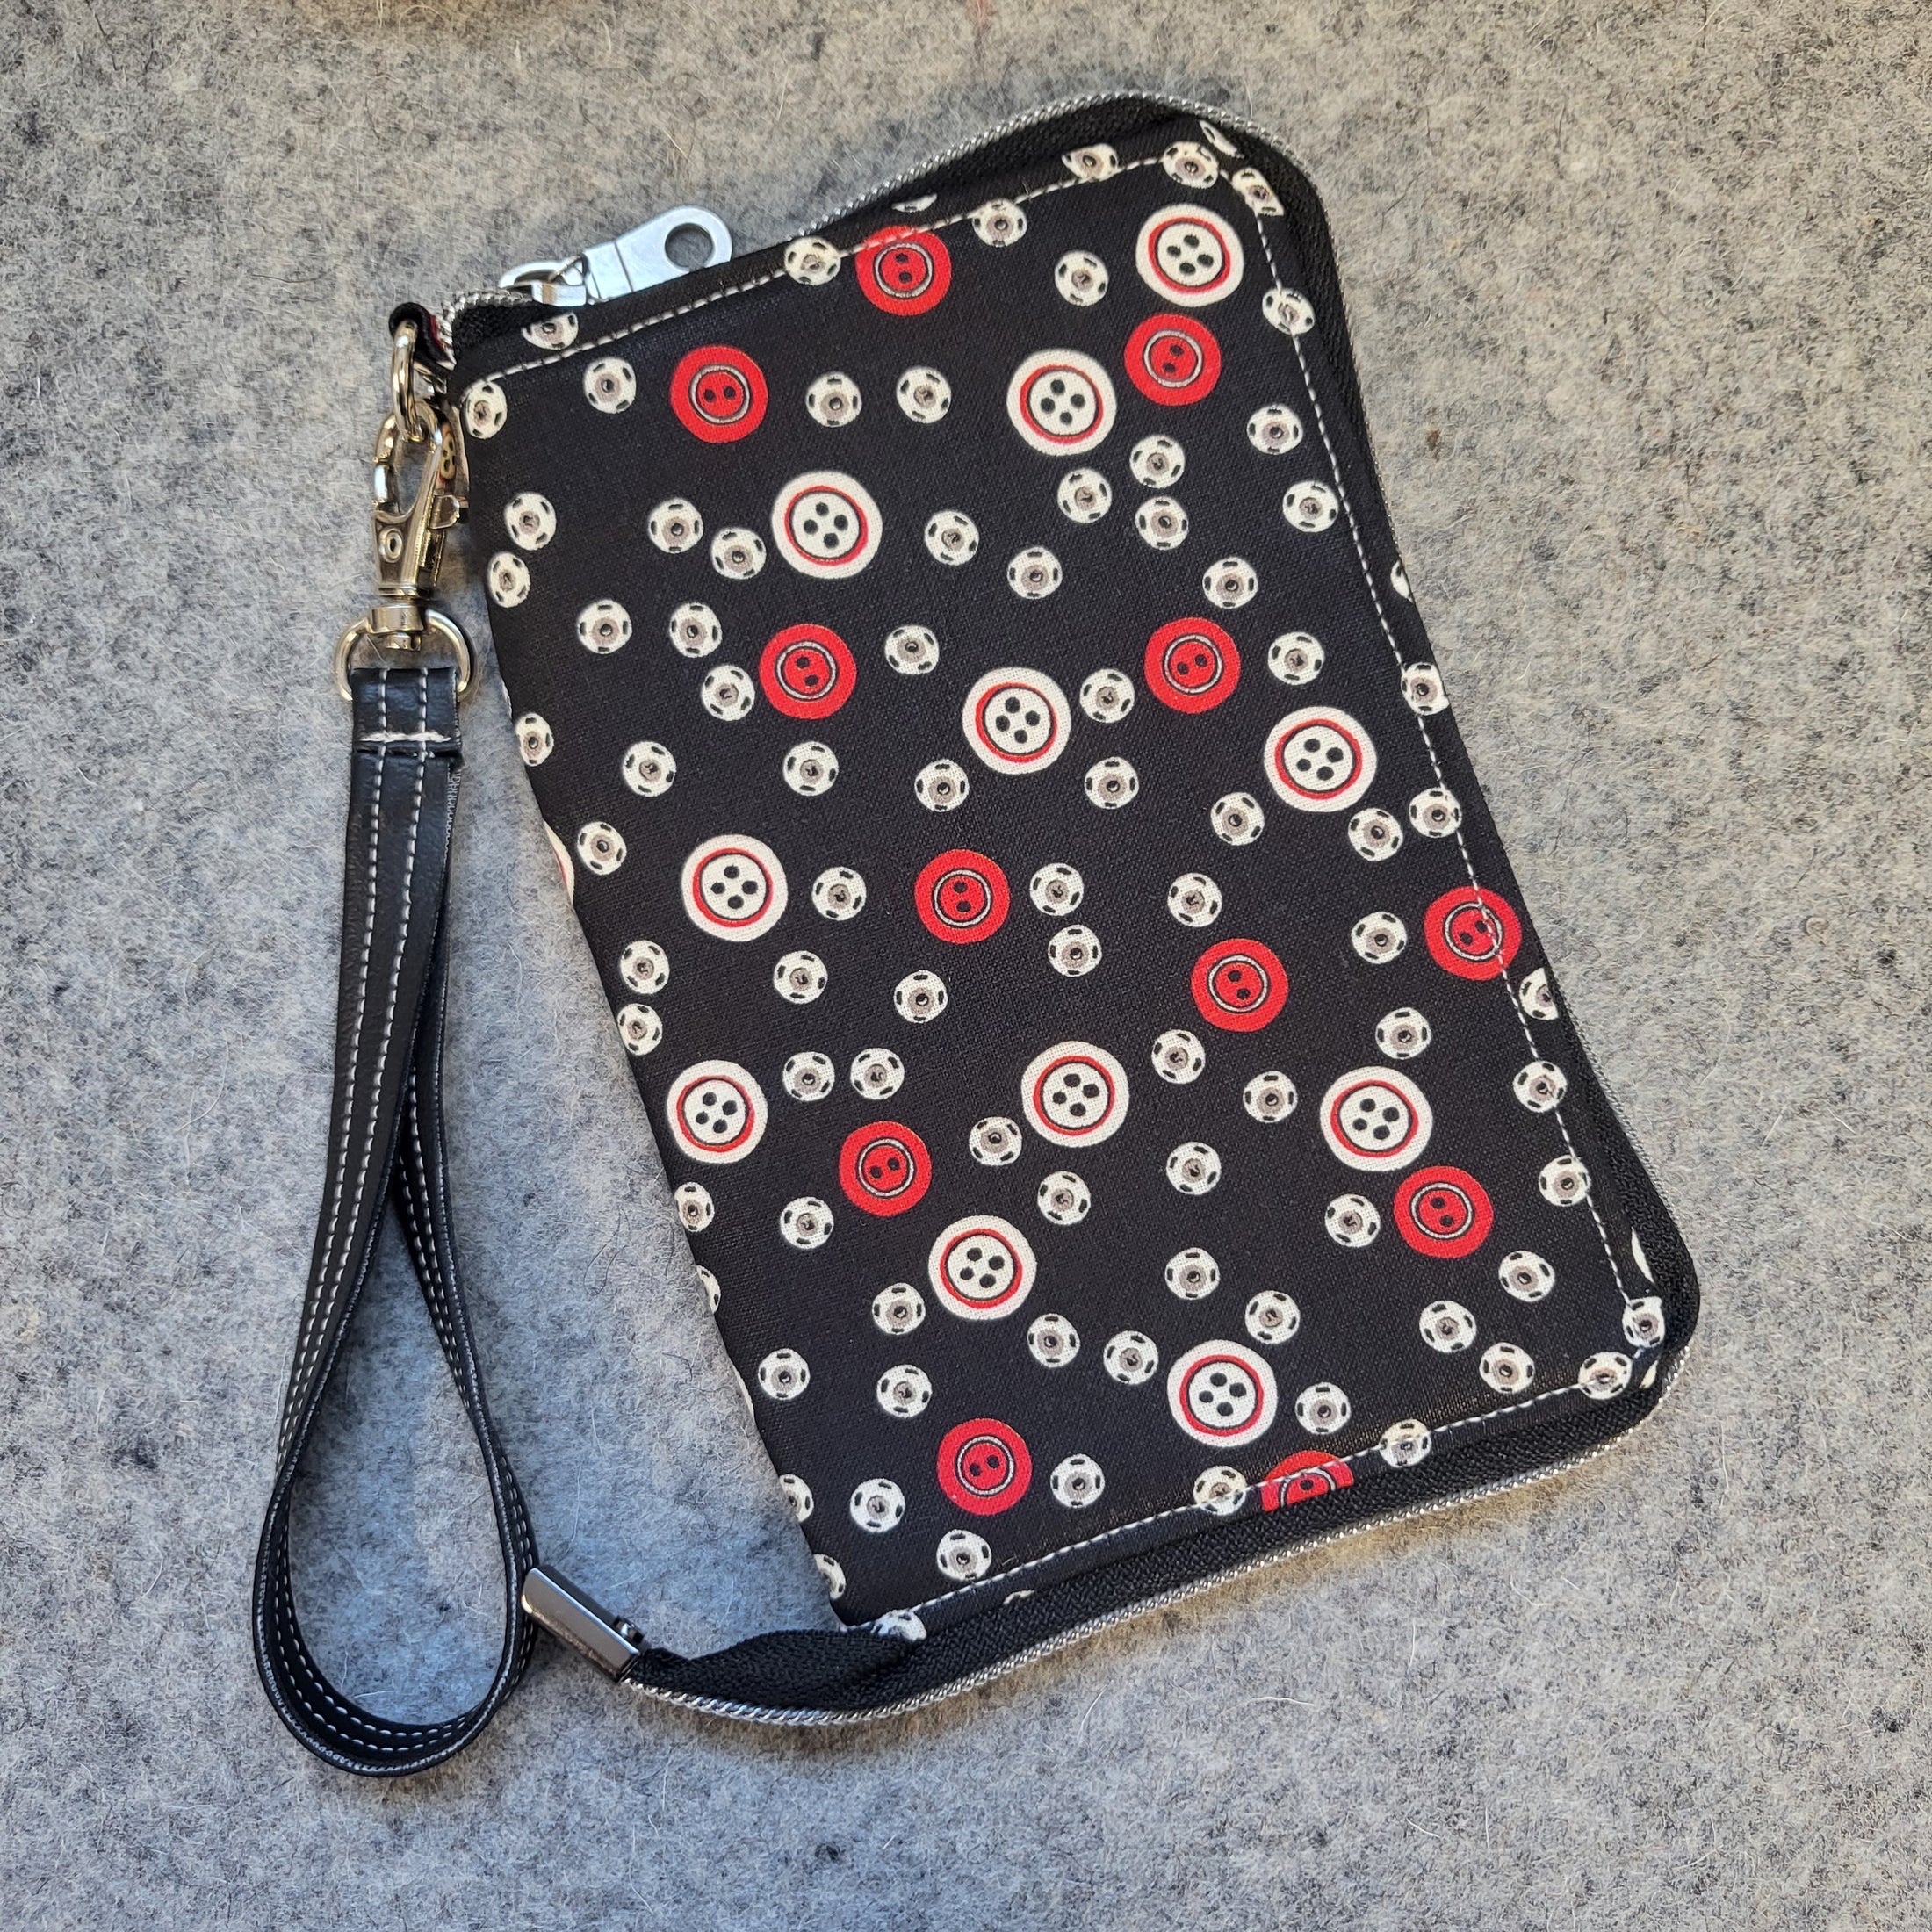 Deluxe buttons and snaps stitch marker organizer case. 